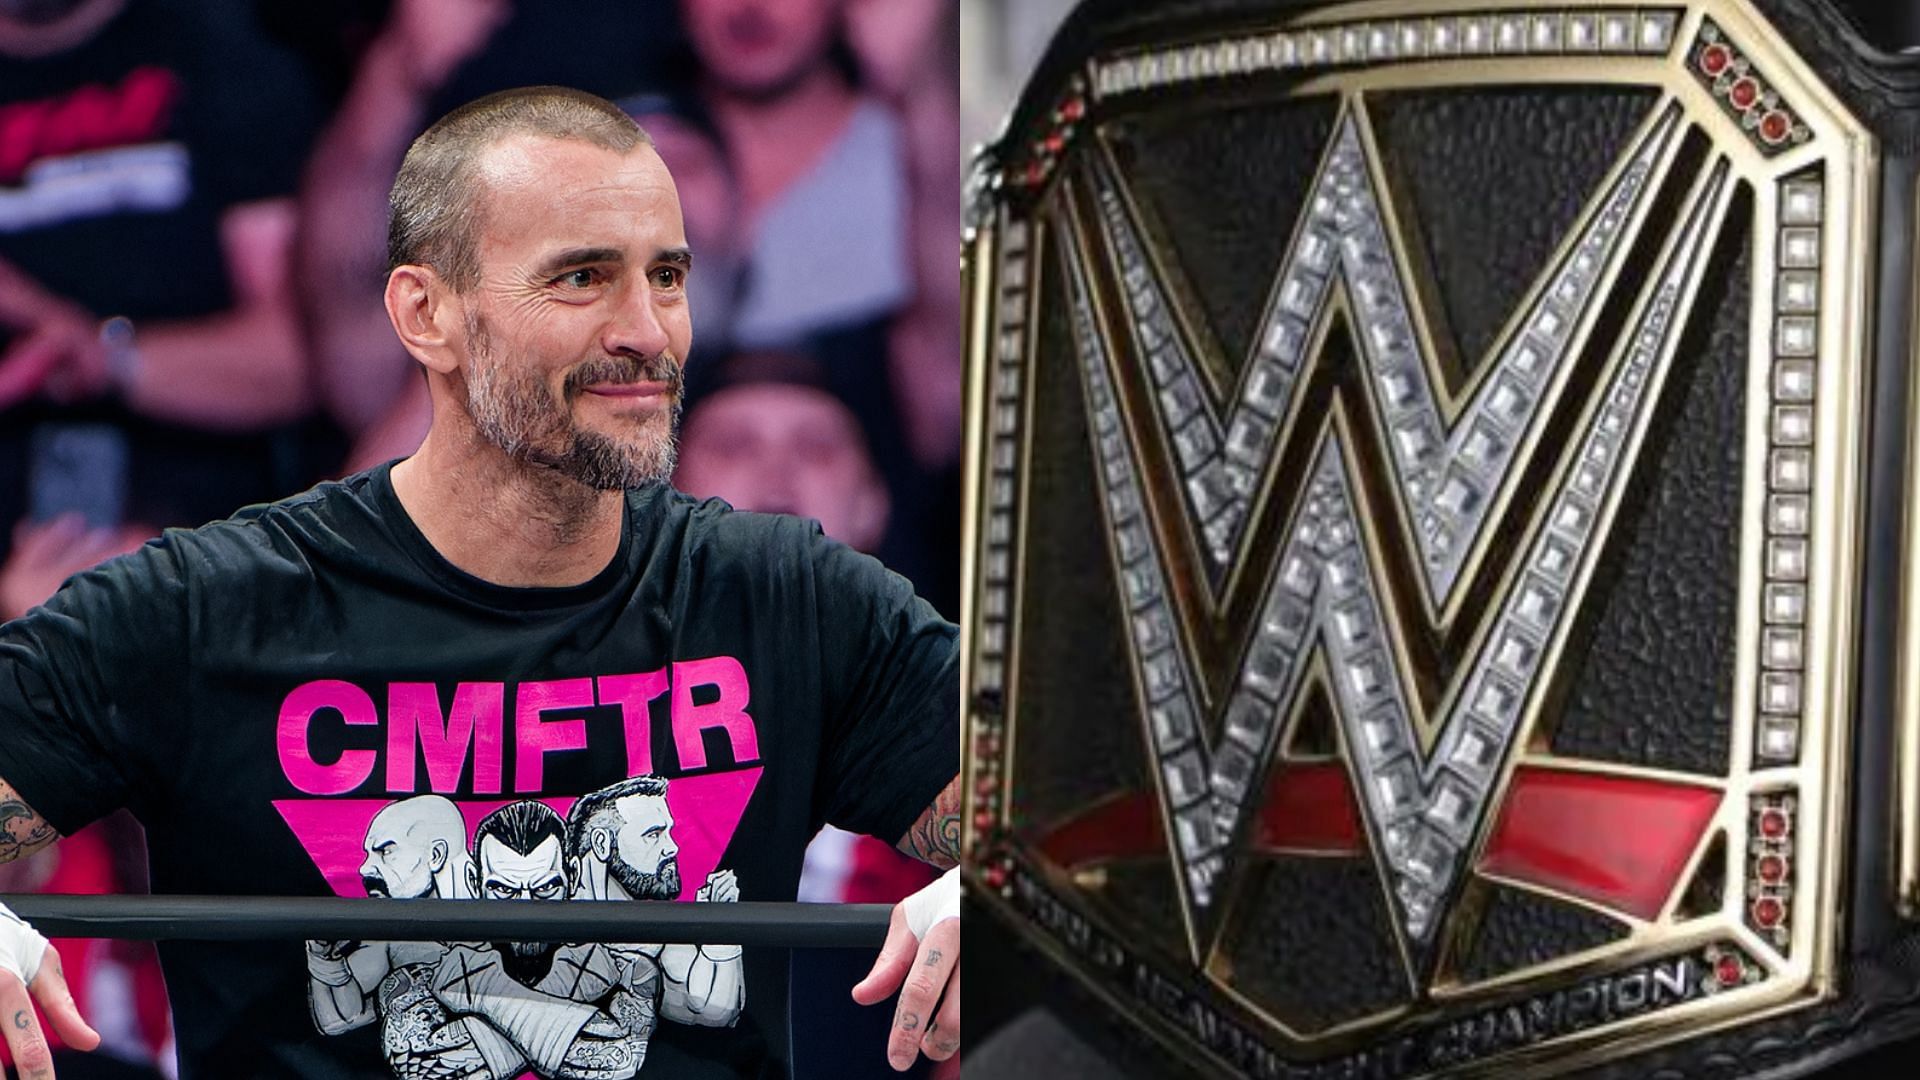 Which former WWE Champion has CM Punk poking fun at?